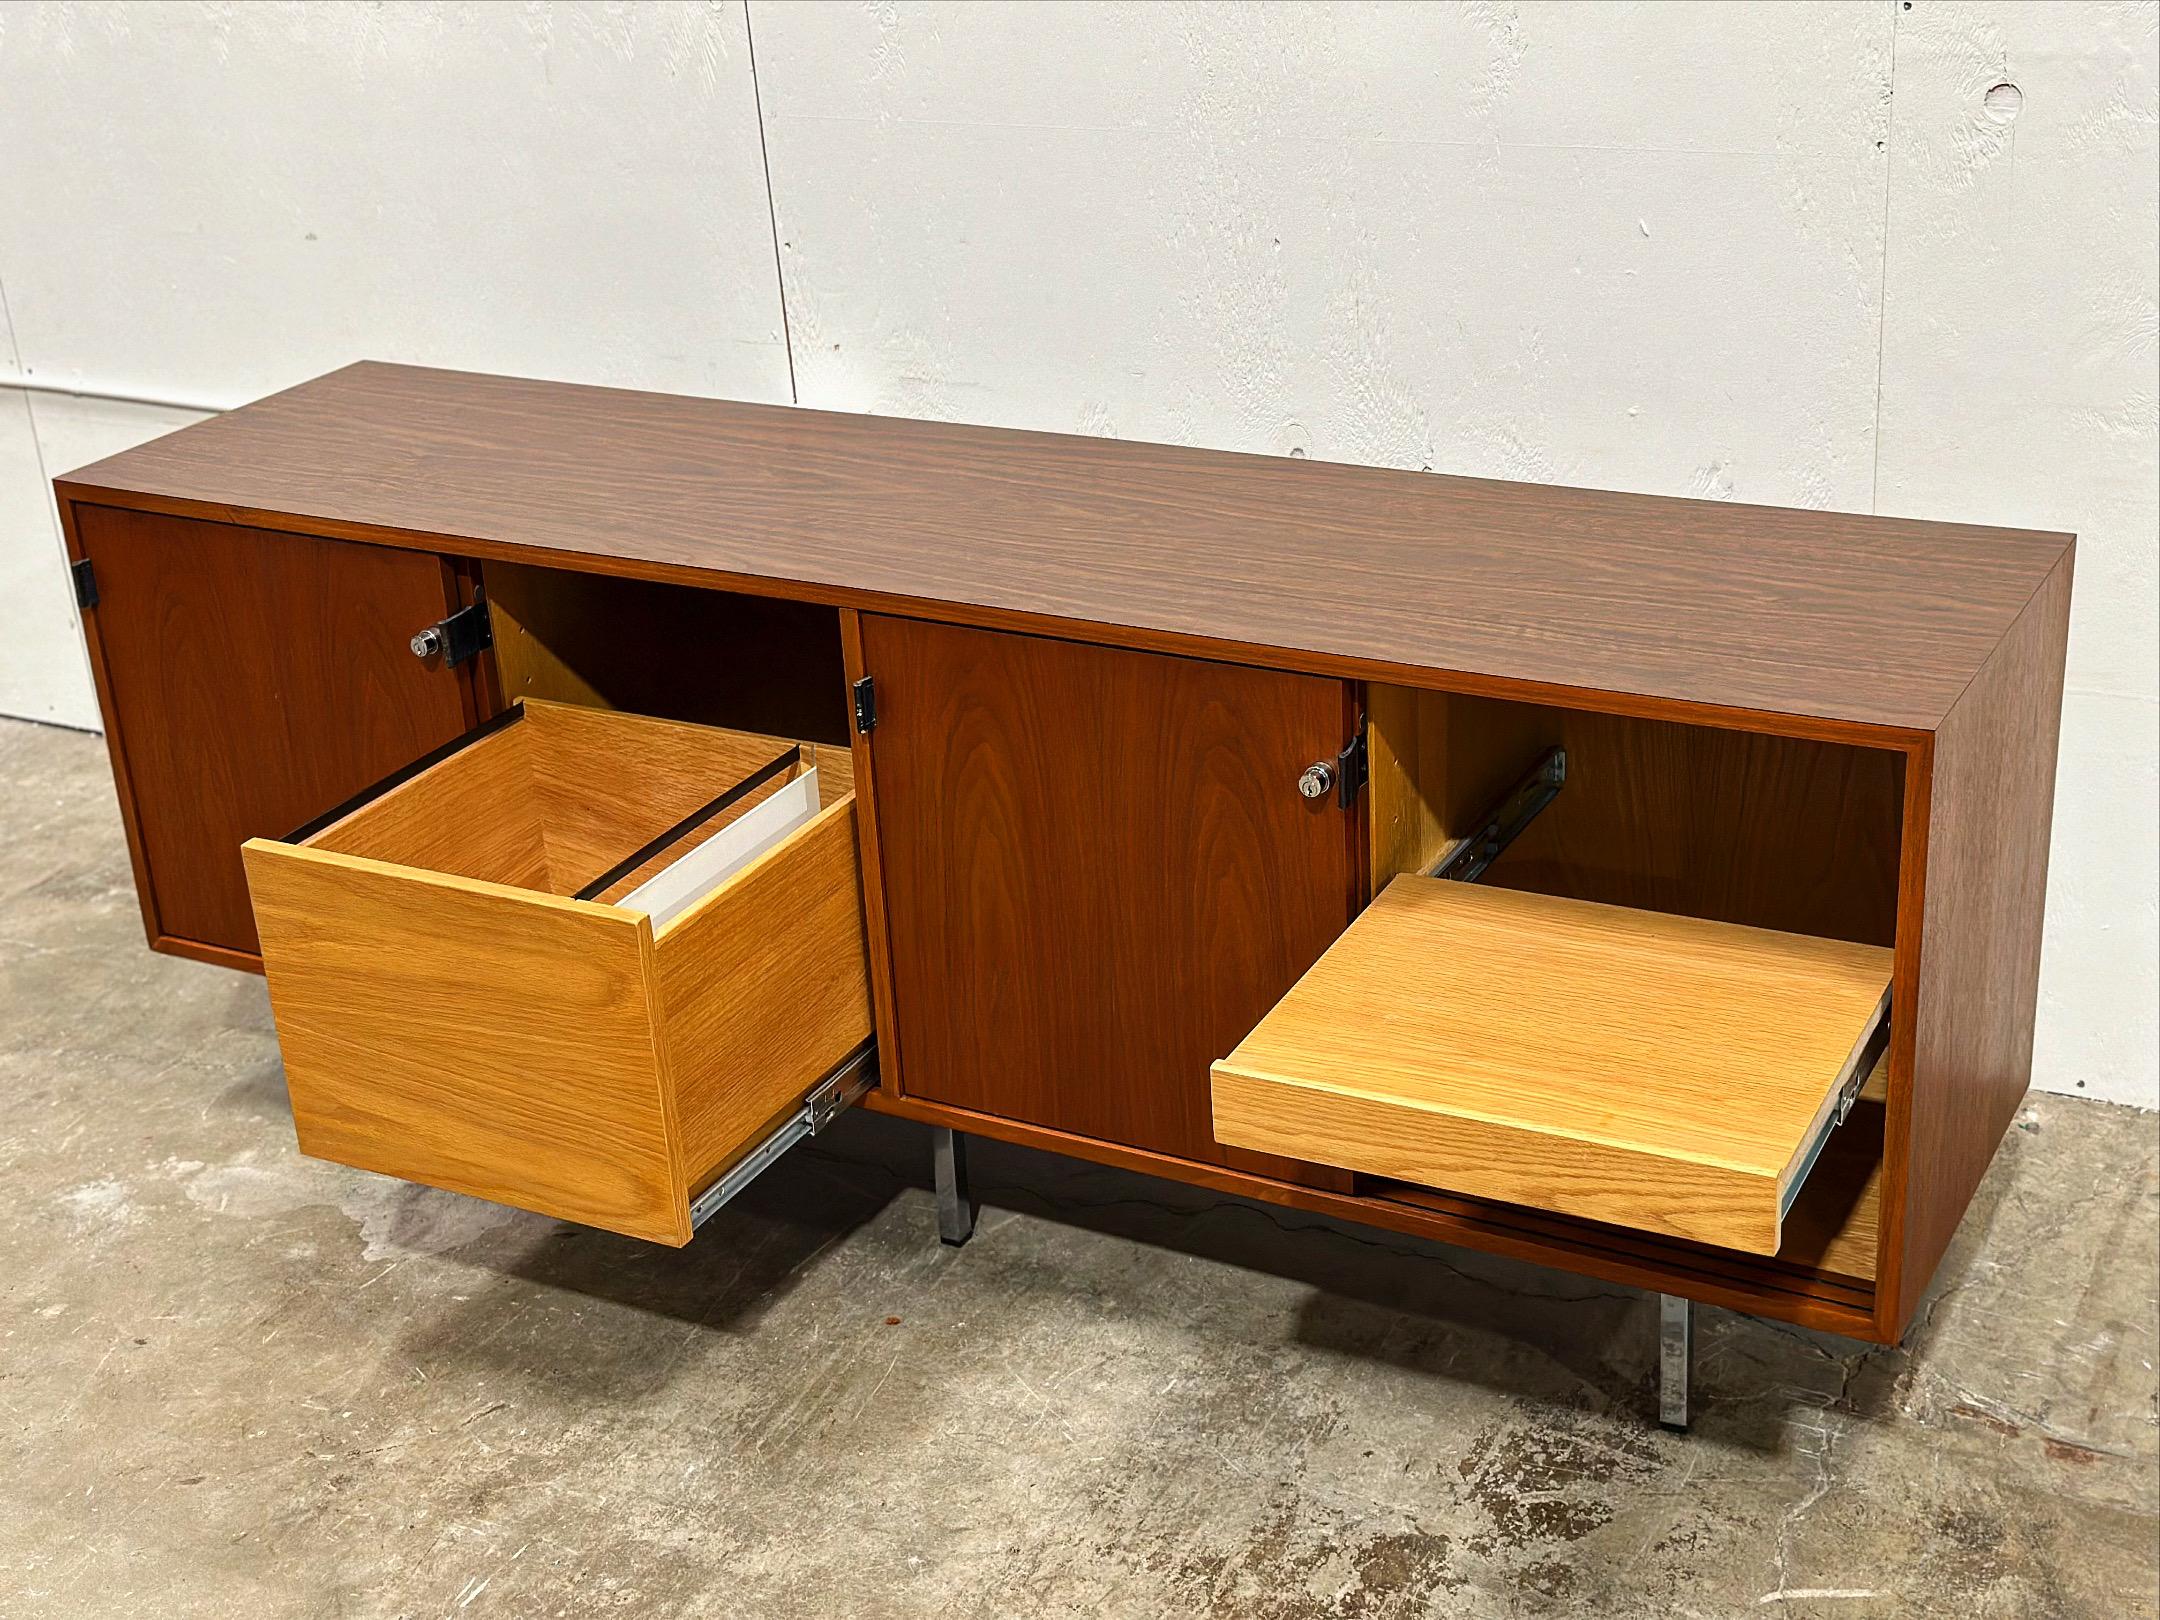 Vintage Midcentury Florence Knoll Credenza - Walnut + Chrome + Leather For Sale 1